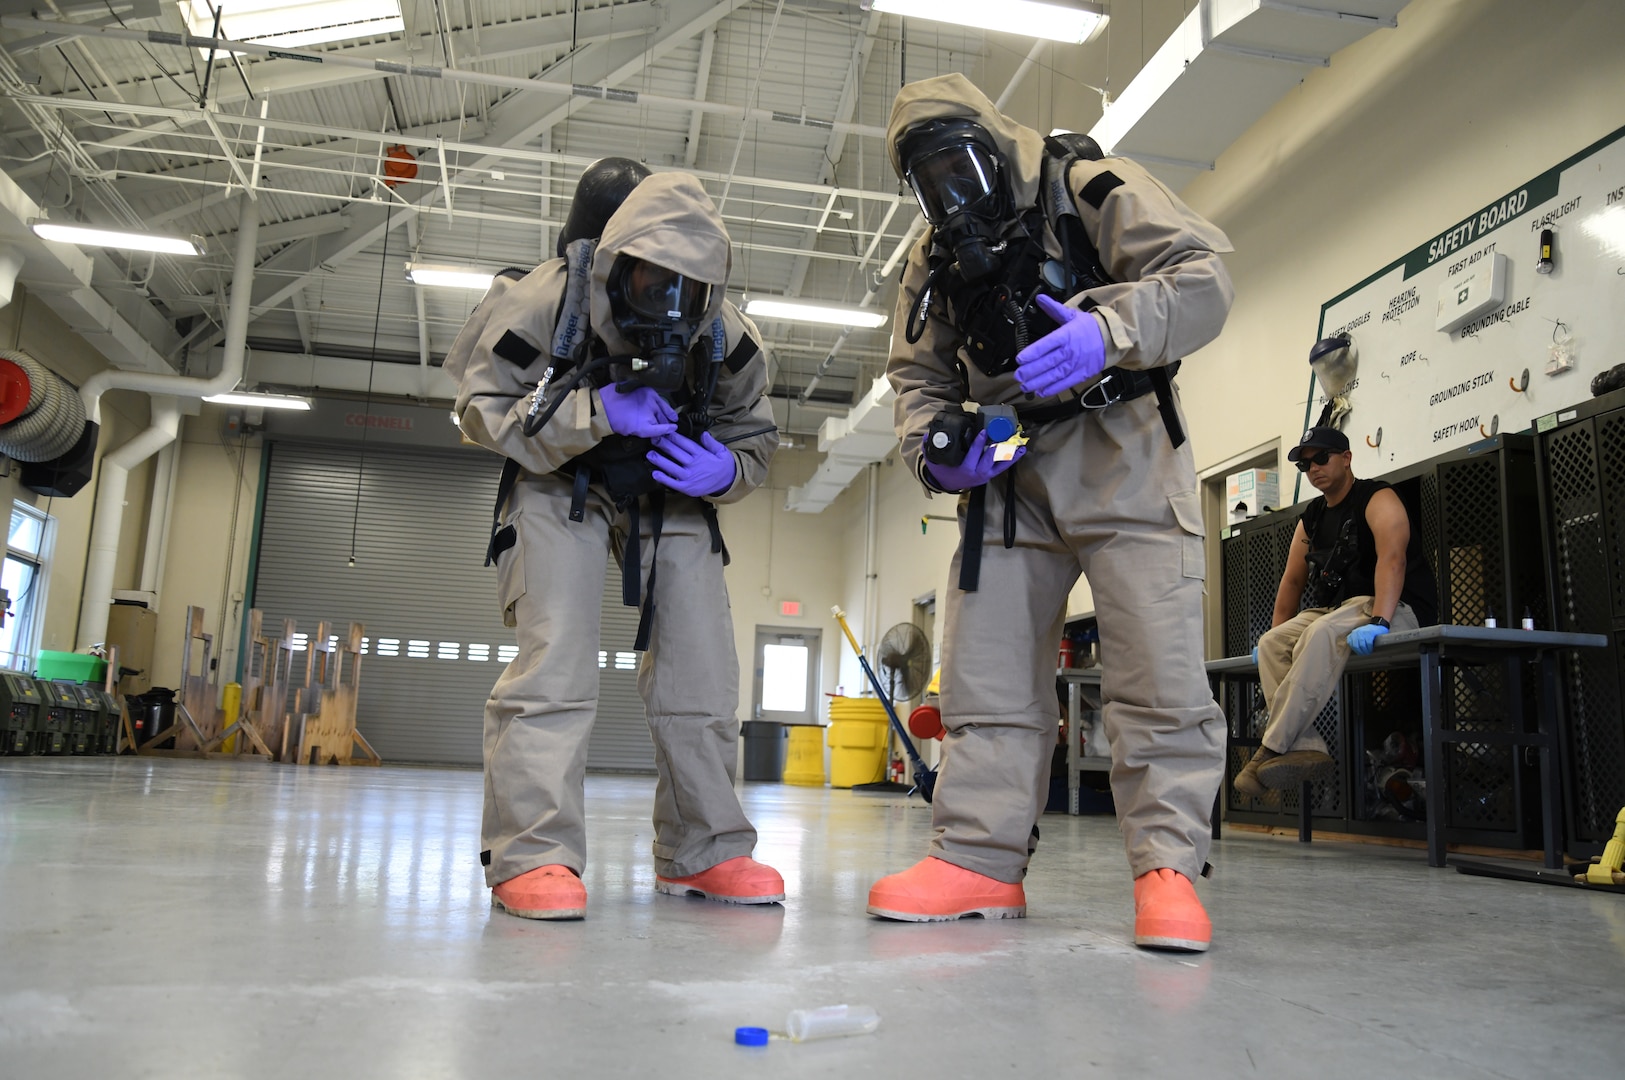 Weapons of Mass Destruction Civil Support Team members in protective equipment respond to a potential chemical, biological, or radiological threat while participating in a training event at Ft. Buchanan, Puerto Rico, Aug. 17, 2021. The training scenarios include response, evaluation, testing, and securing the area of contamination. The members are made up of soldiers and airmen from the 33rd WMD-CST, District of Columbia National Guard, along with other CST's from Texas, North Carolina, West Virginia, Puerto Rico and the District of Columbia Fire and Emergency Management Service.